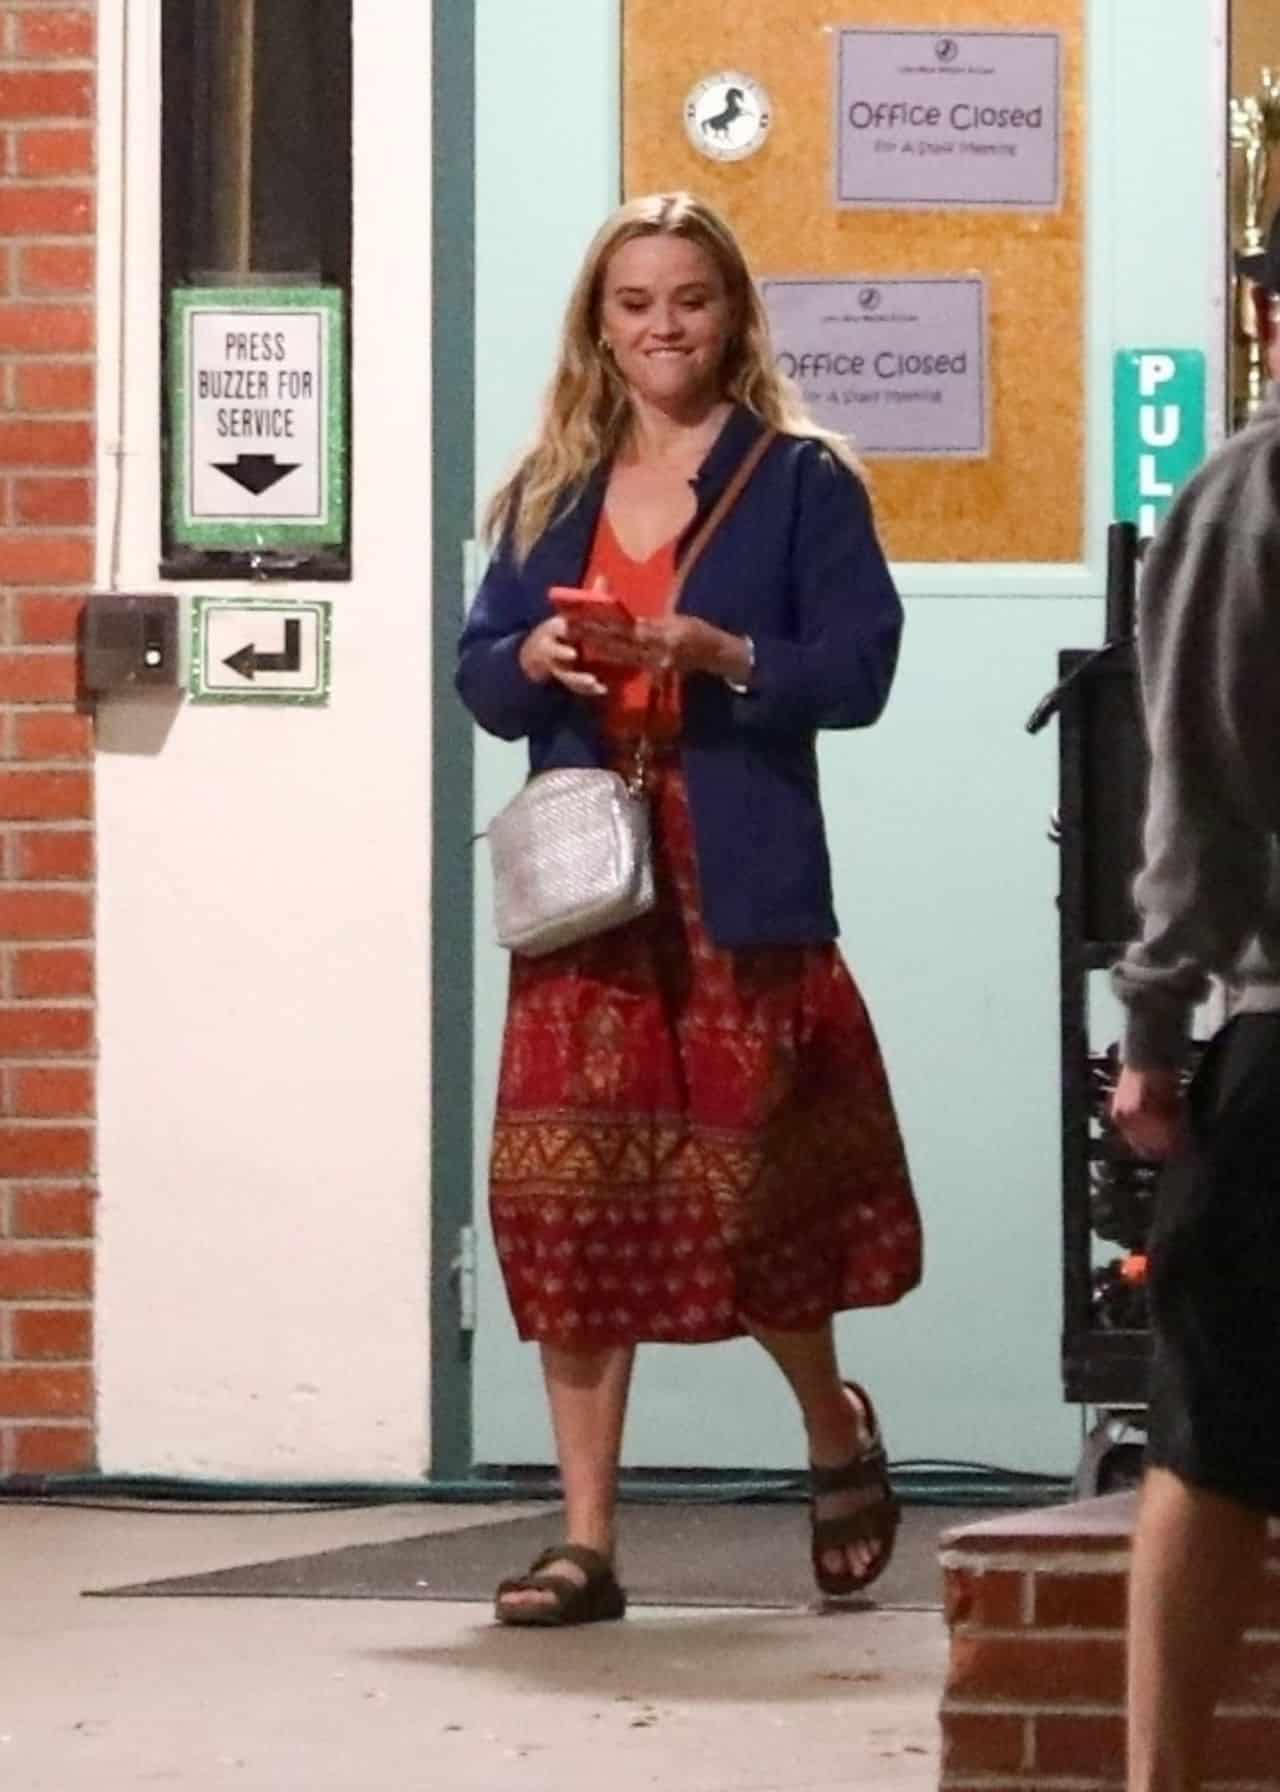 Reese Witherspoon Leaves the Set of “Your Place or Mine” After a Long Day